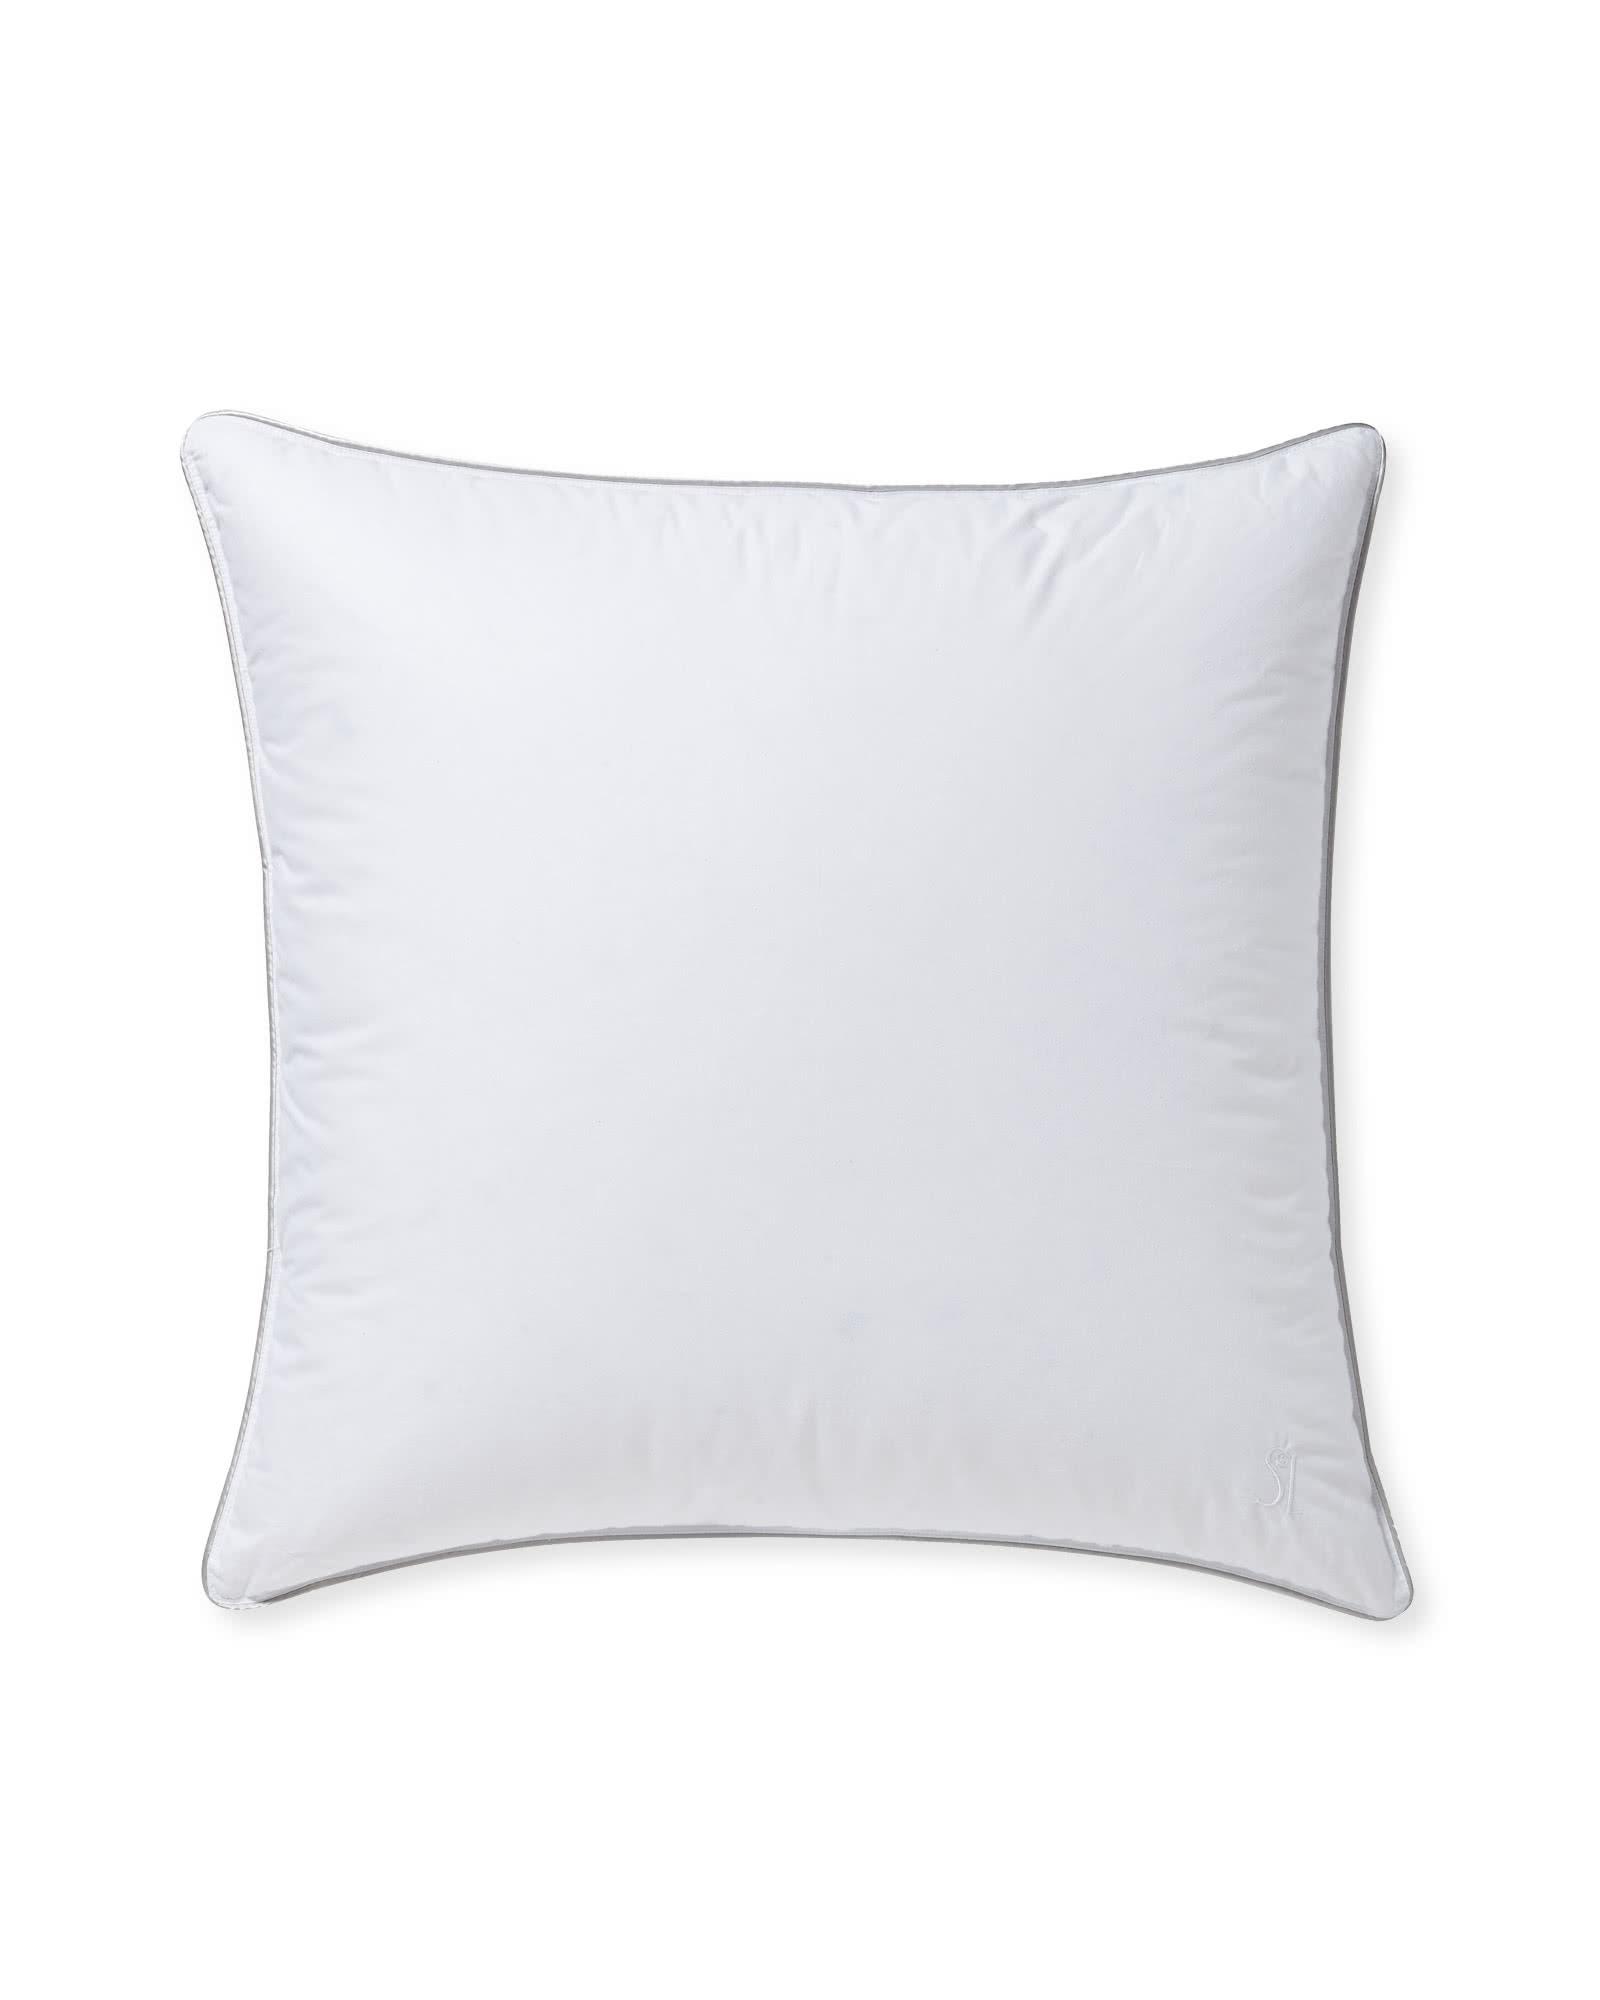 Goose Down Euro Pillow Insert | Serena and Lily